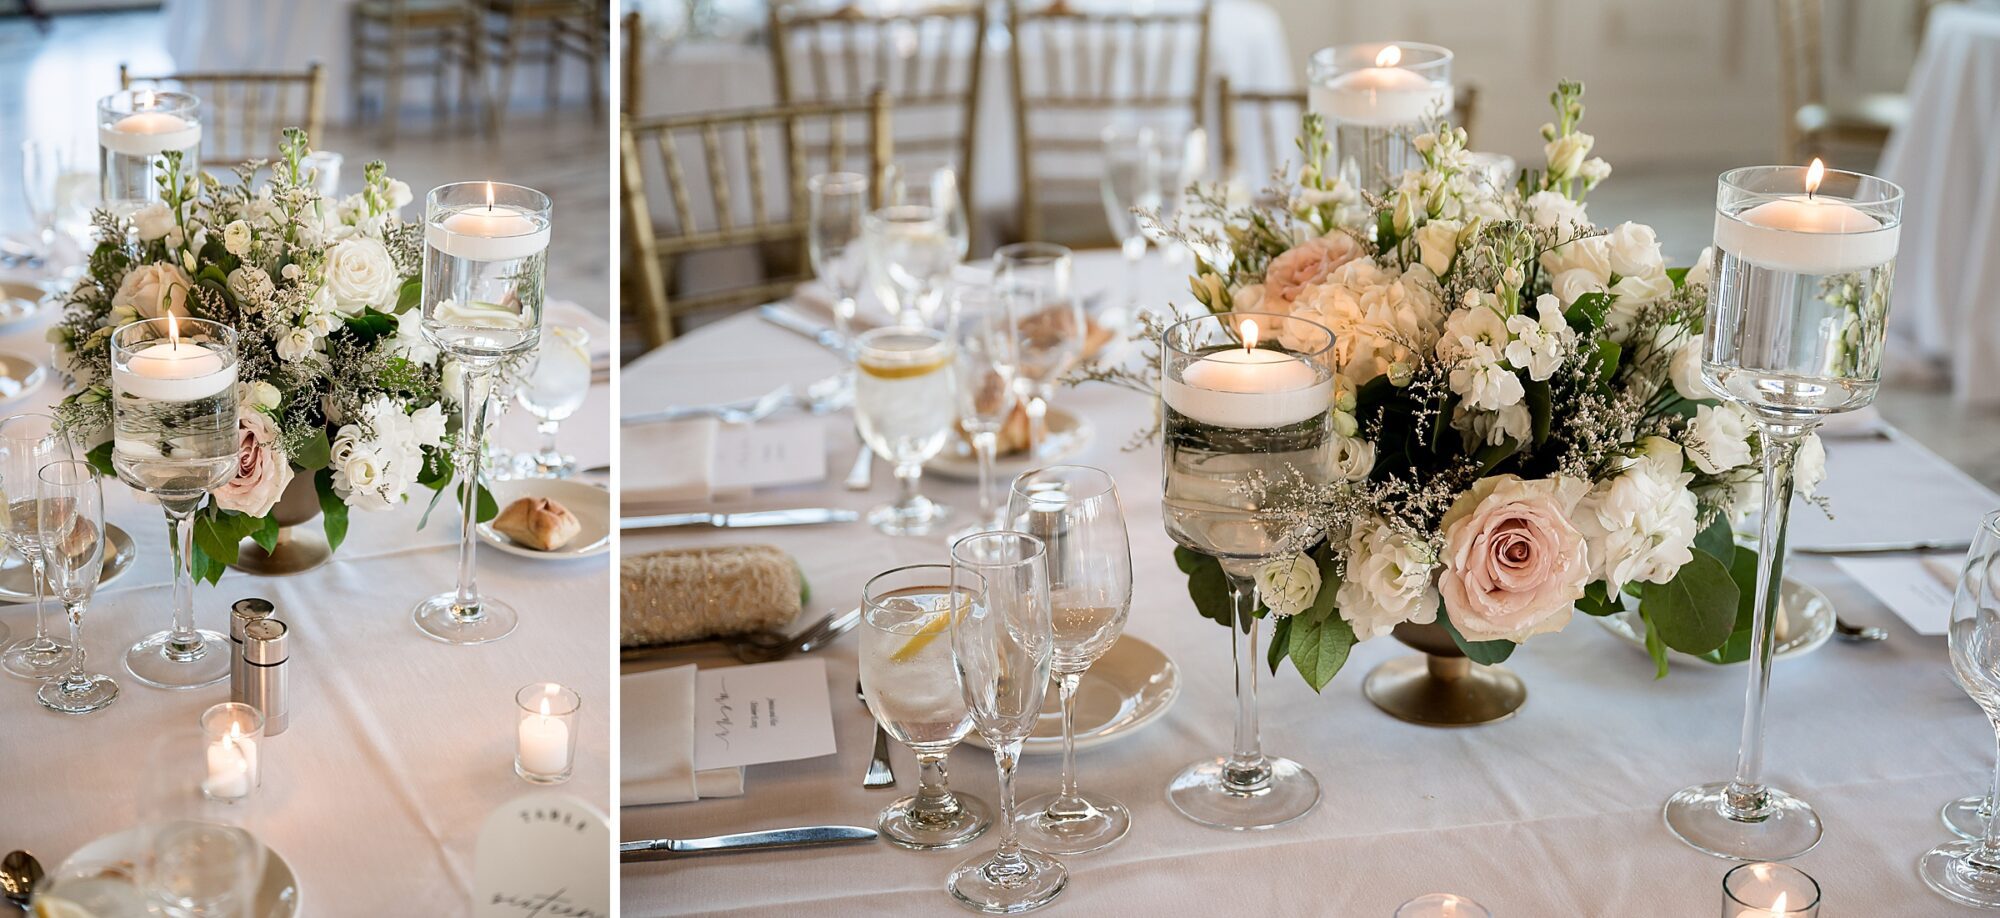 A wedding table setting with candles and flowers.